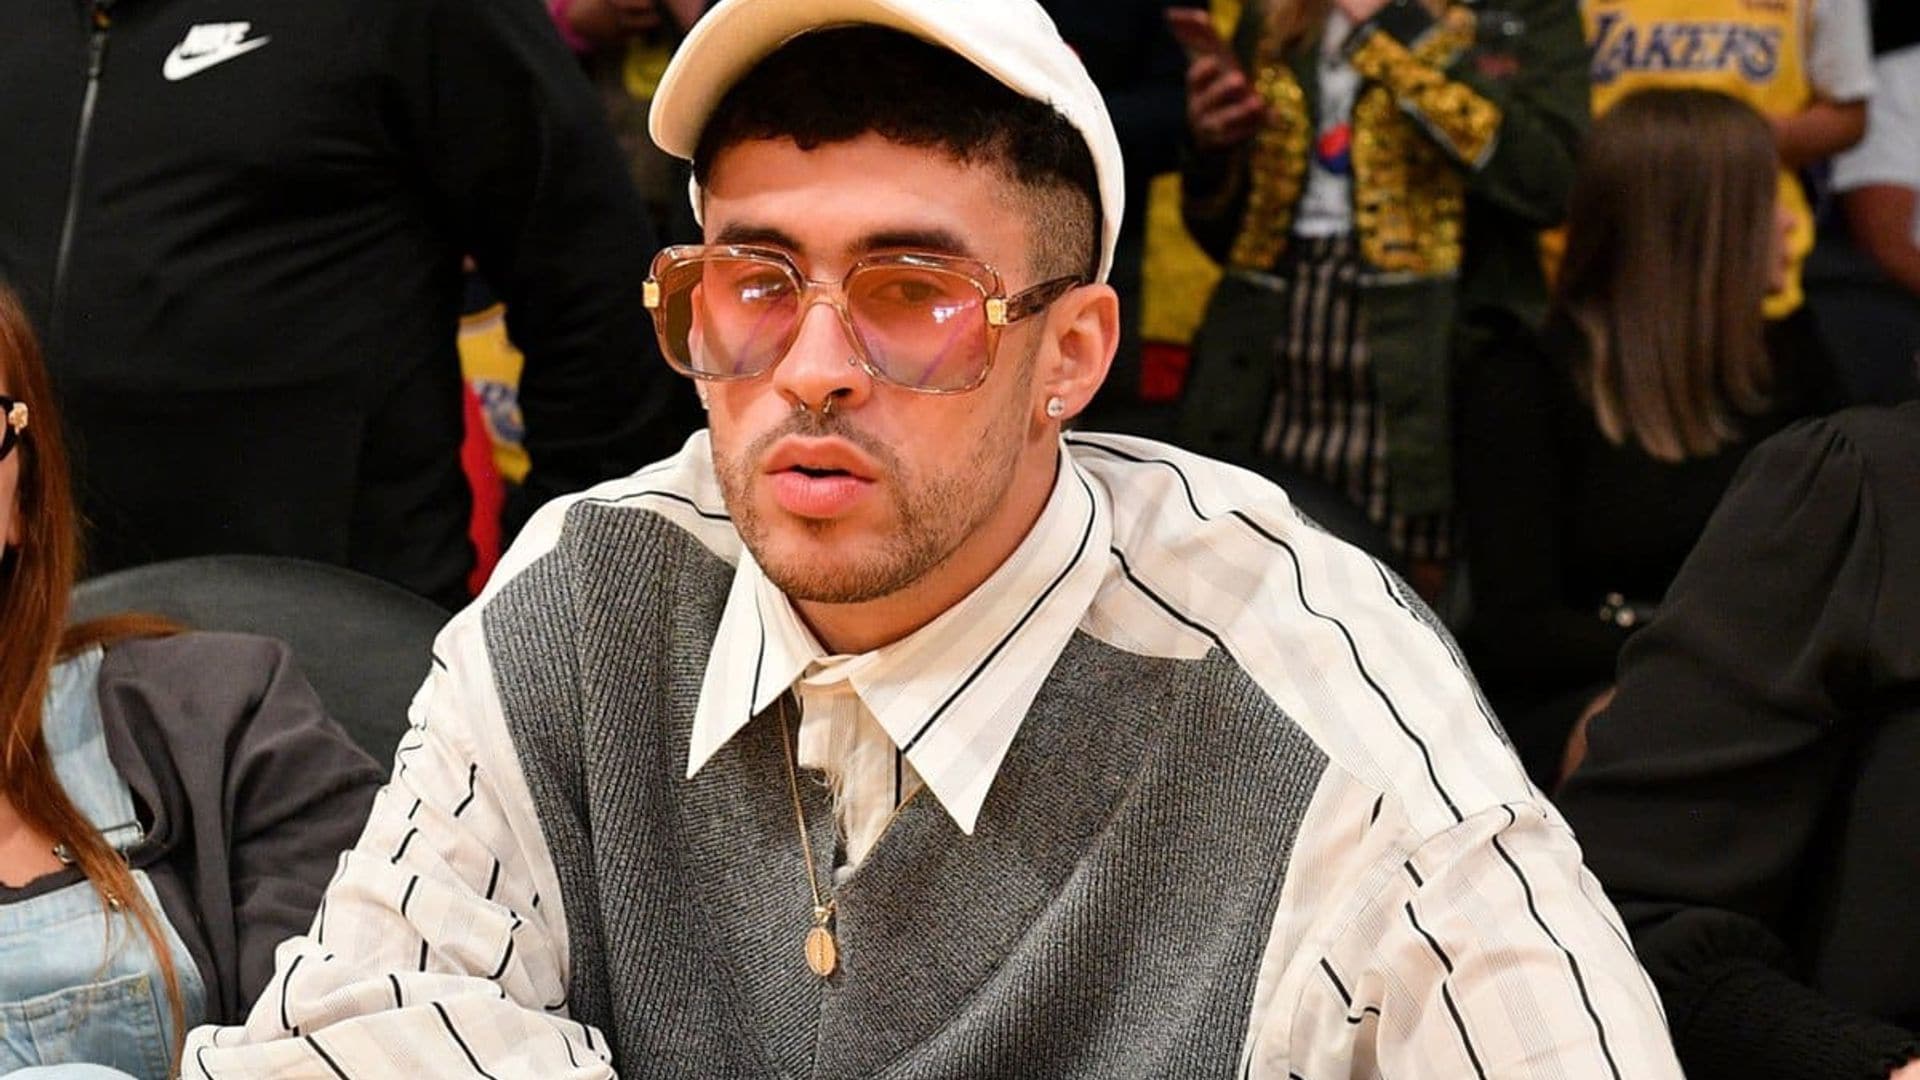 Bad Bunny to make his acting debut in Netflix’s ‘Narcos: Mexico’